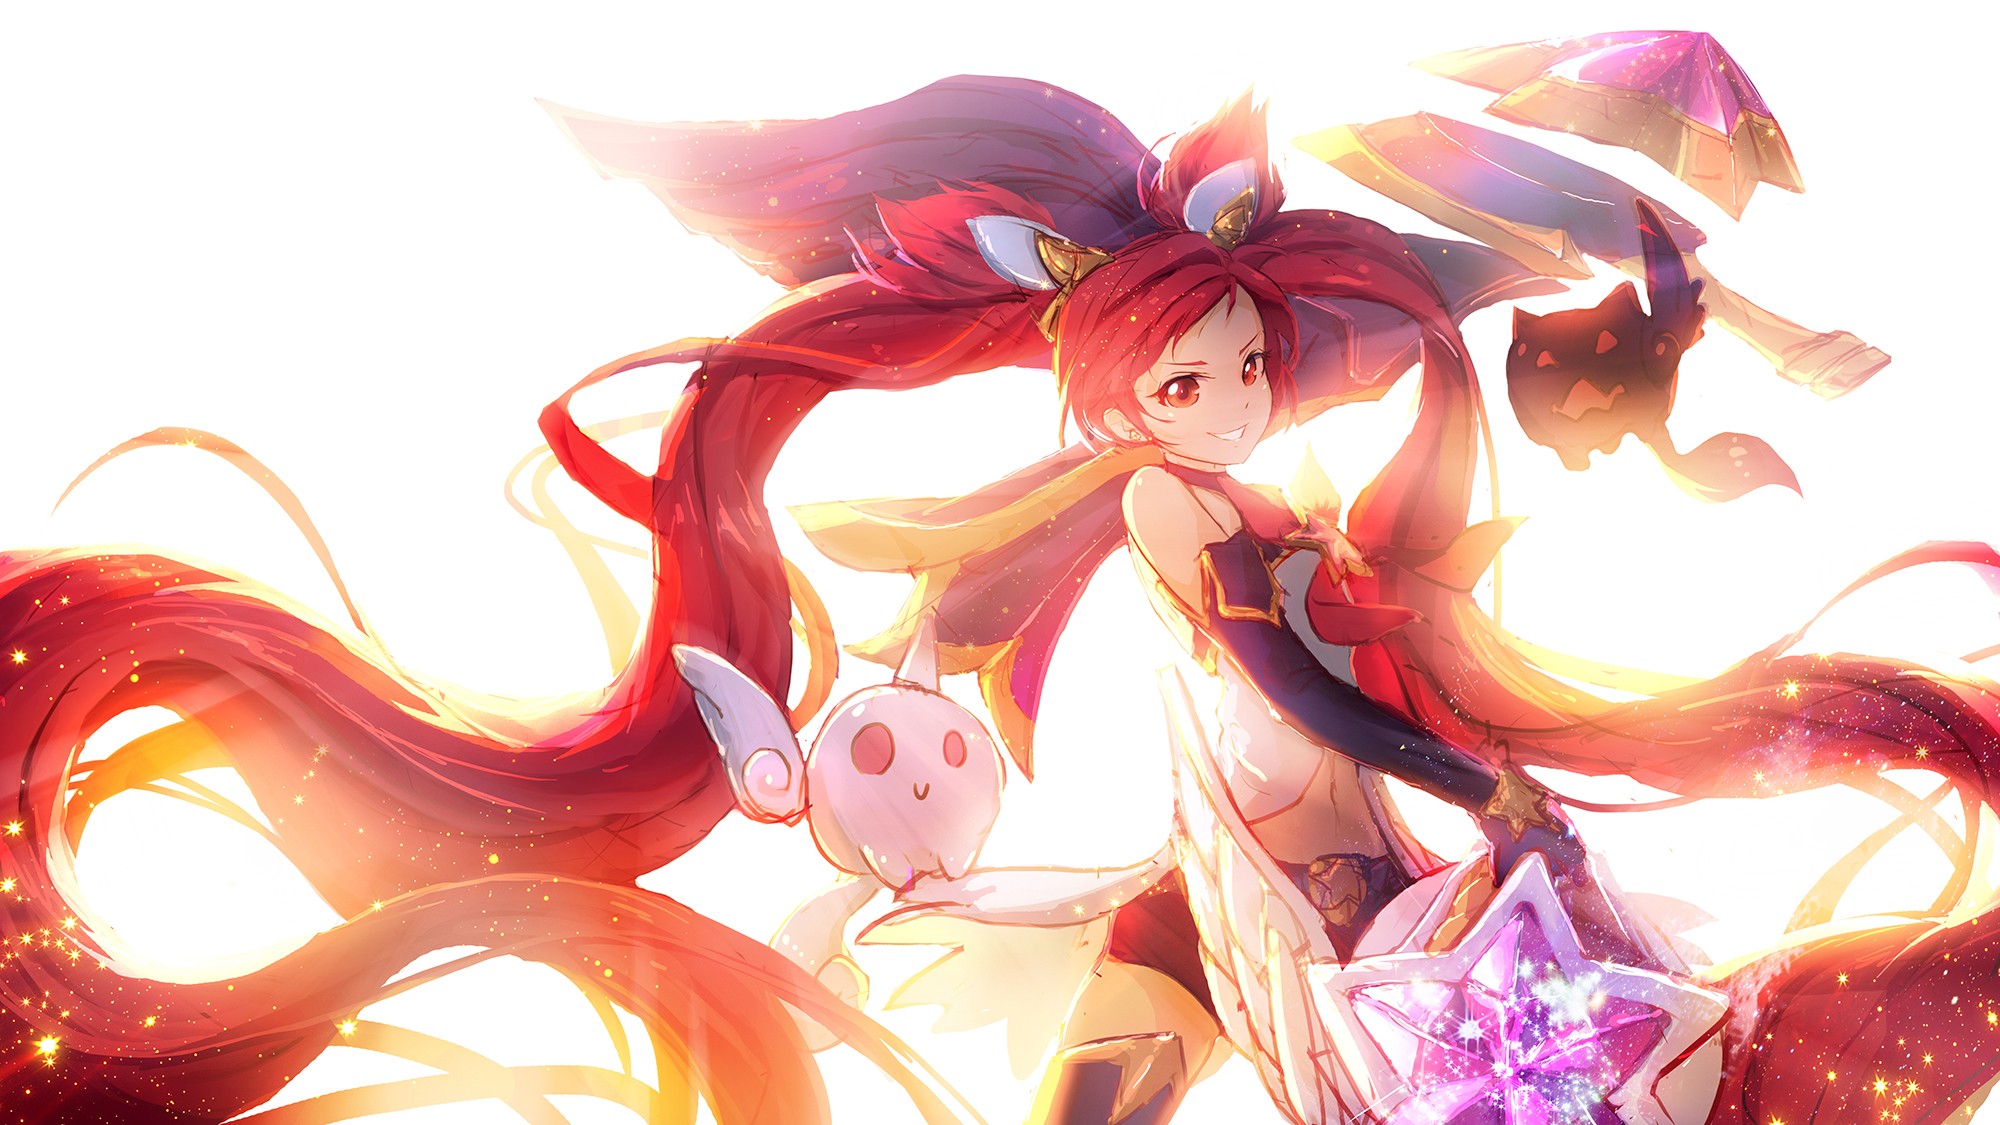 Anime 2000x1125 anime anime girls League of Legends Jinx (League of Legends) long hair redhead red eyes Star Guardian video game characters Pixiv digital glowing smiling video game art fan art video game girls